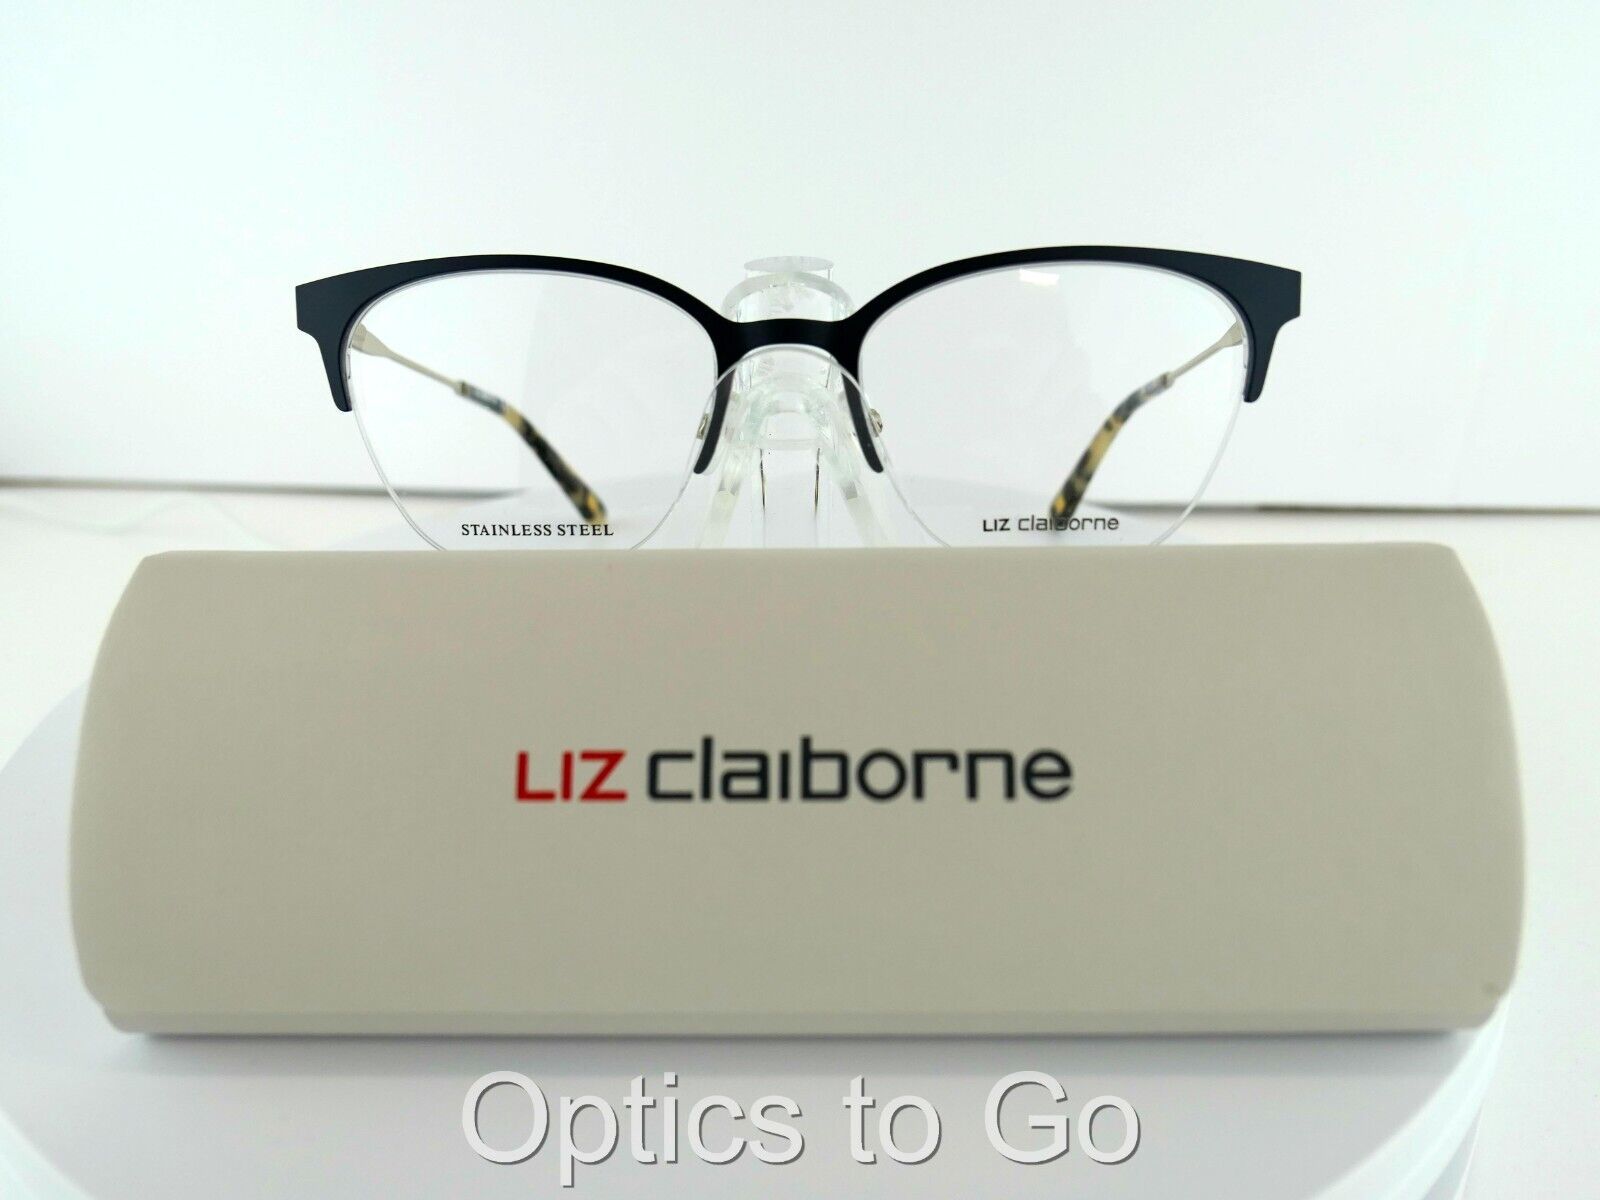 Primary image for LIZ CLAIBORNE L 658 (KY2) BLUE GOLD 51-18-135 STAINLESS STEEL Eyeglass frames